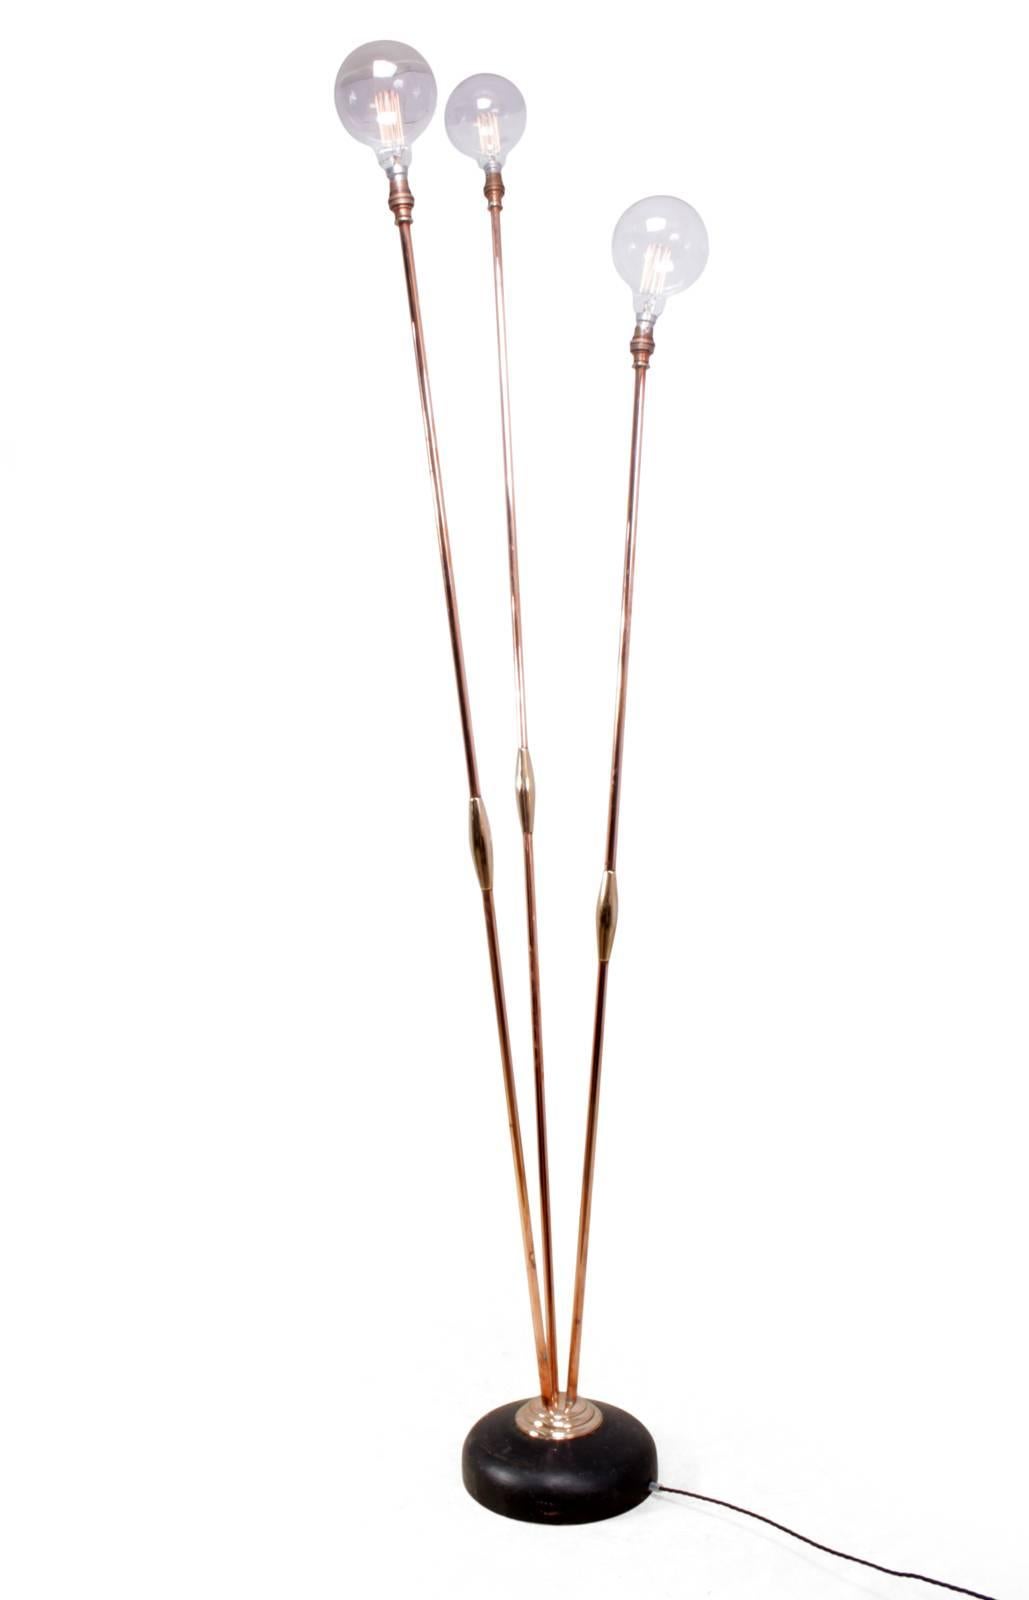 French brass and copper floor lamp, circa 1950
This French midcentury design floor standing lamp full rewire and pat tested

Age: 1950

Style: Mid-Century Modern

Material: Brass and copper

Condition: Very good

Dimensions: 191 H x 49 W